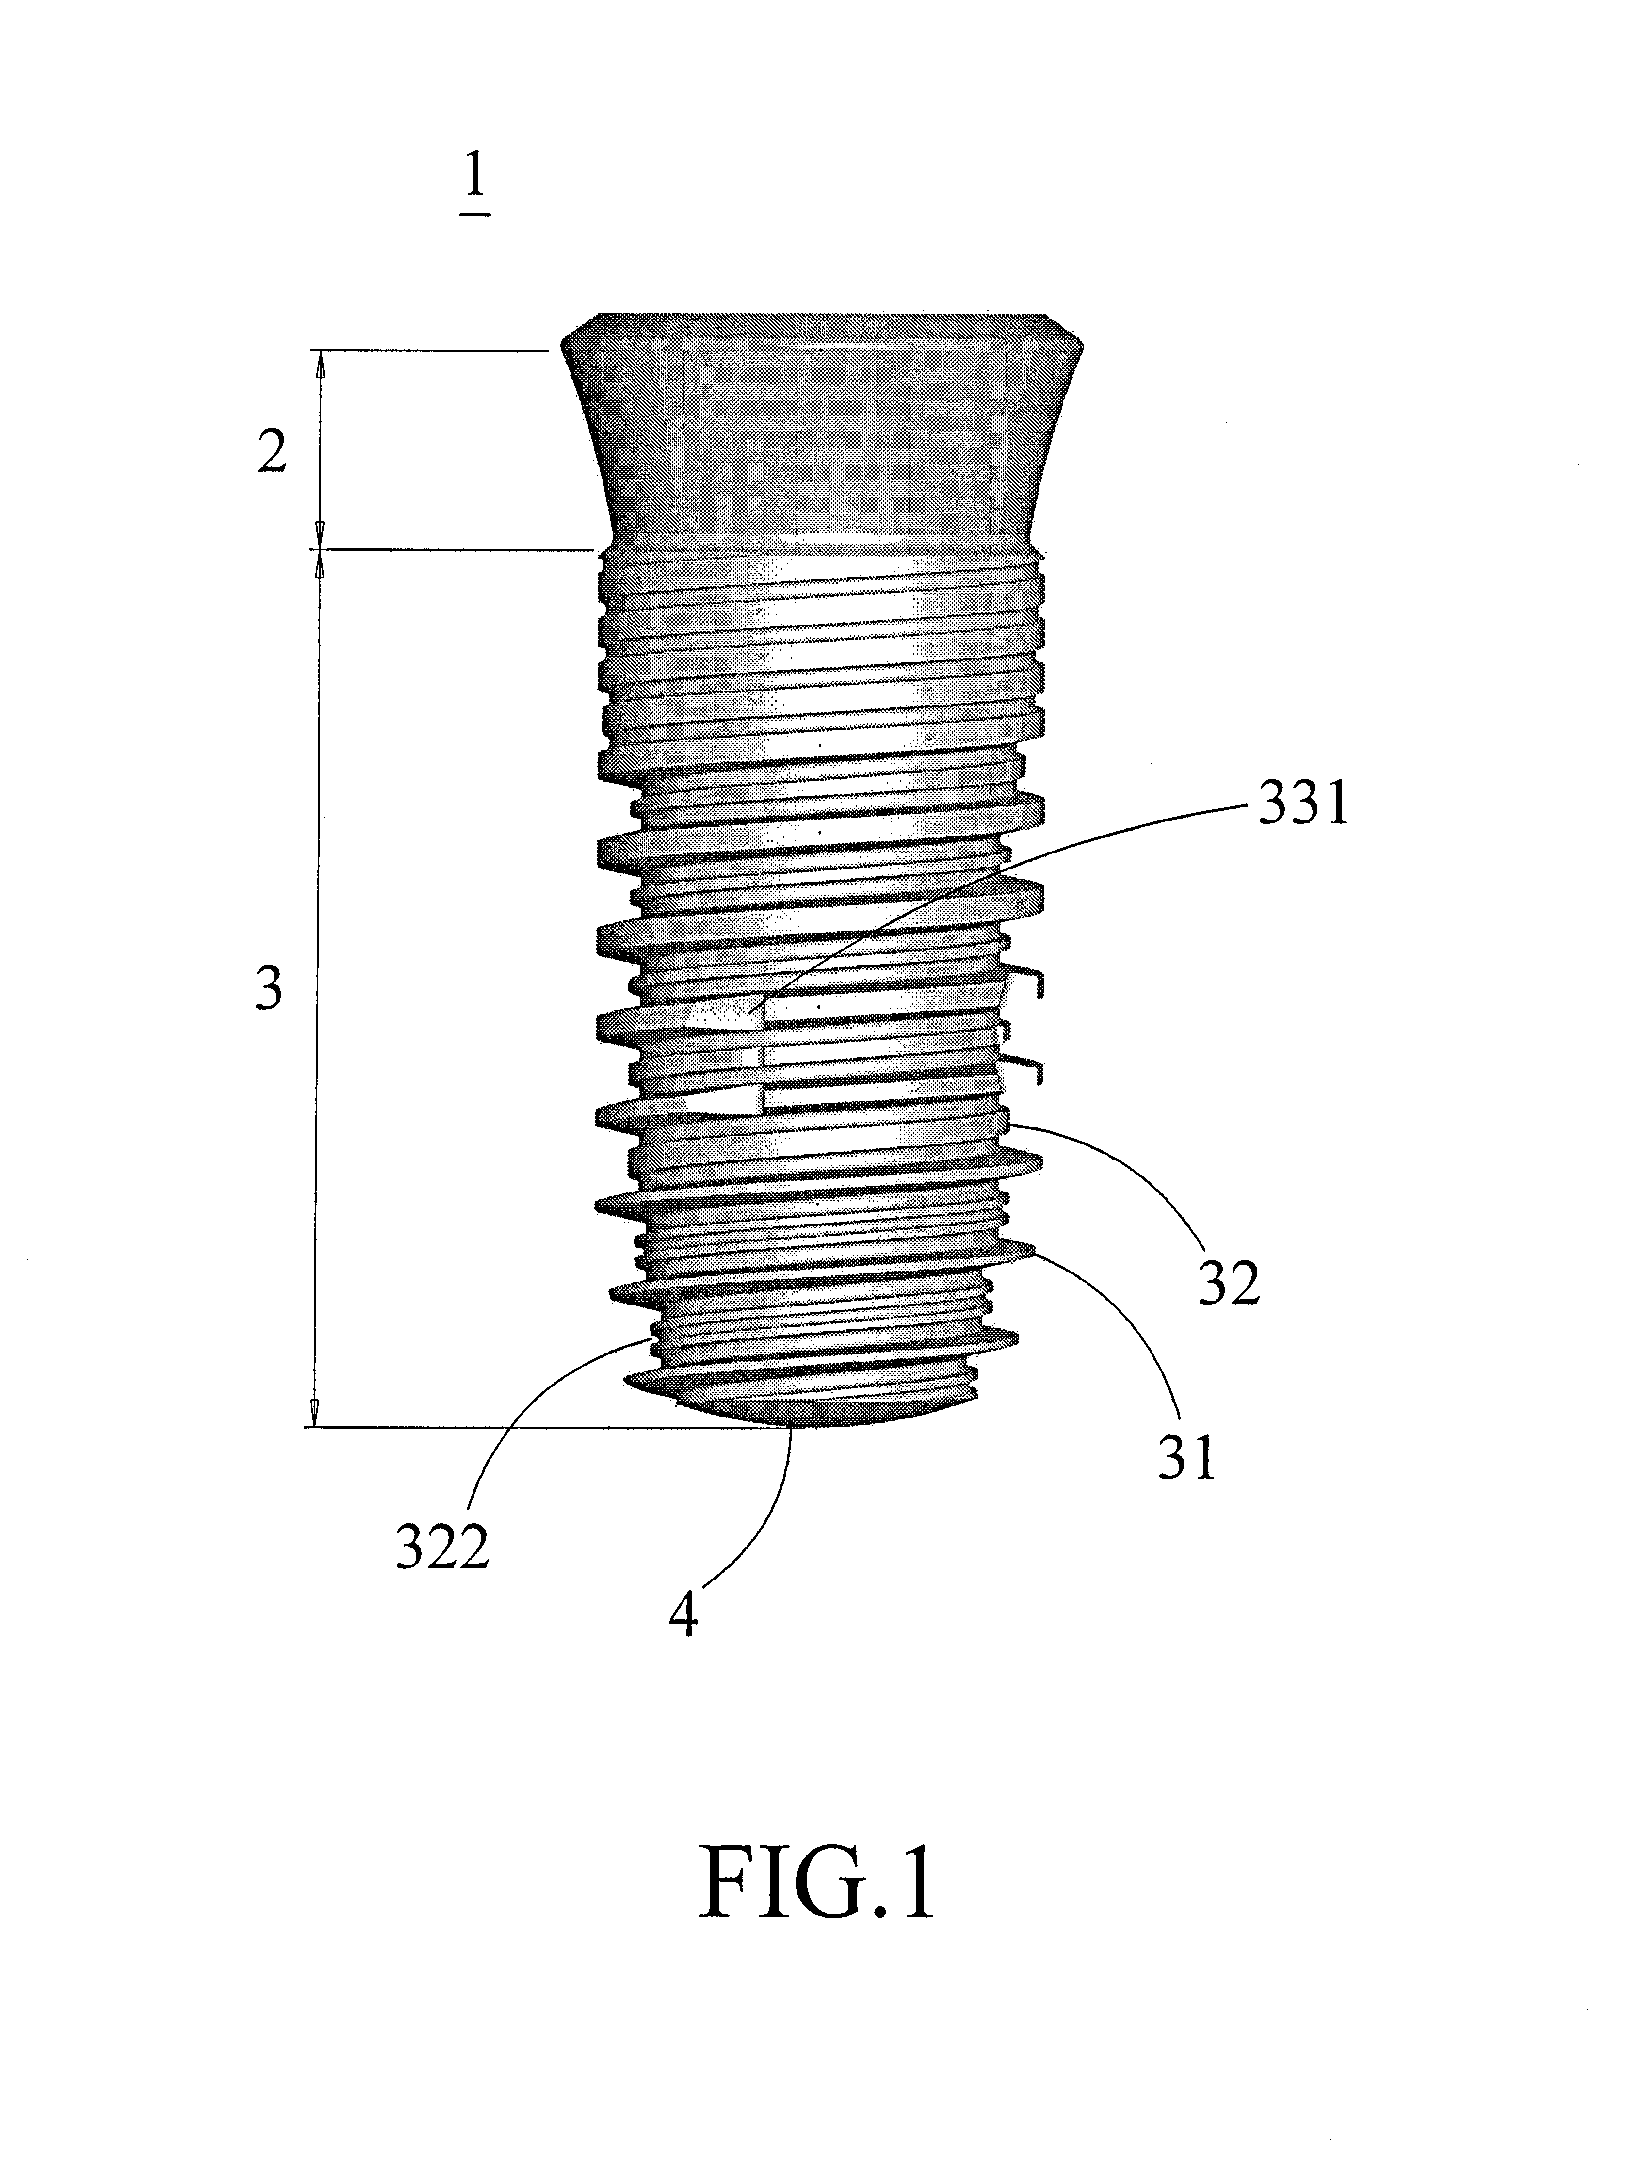 Artificial root for dental implantation and method for manufacturing the same